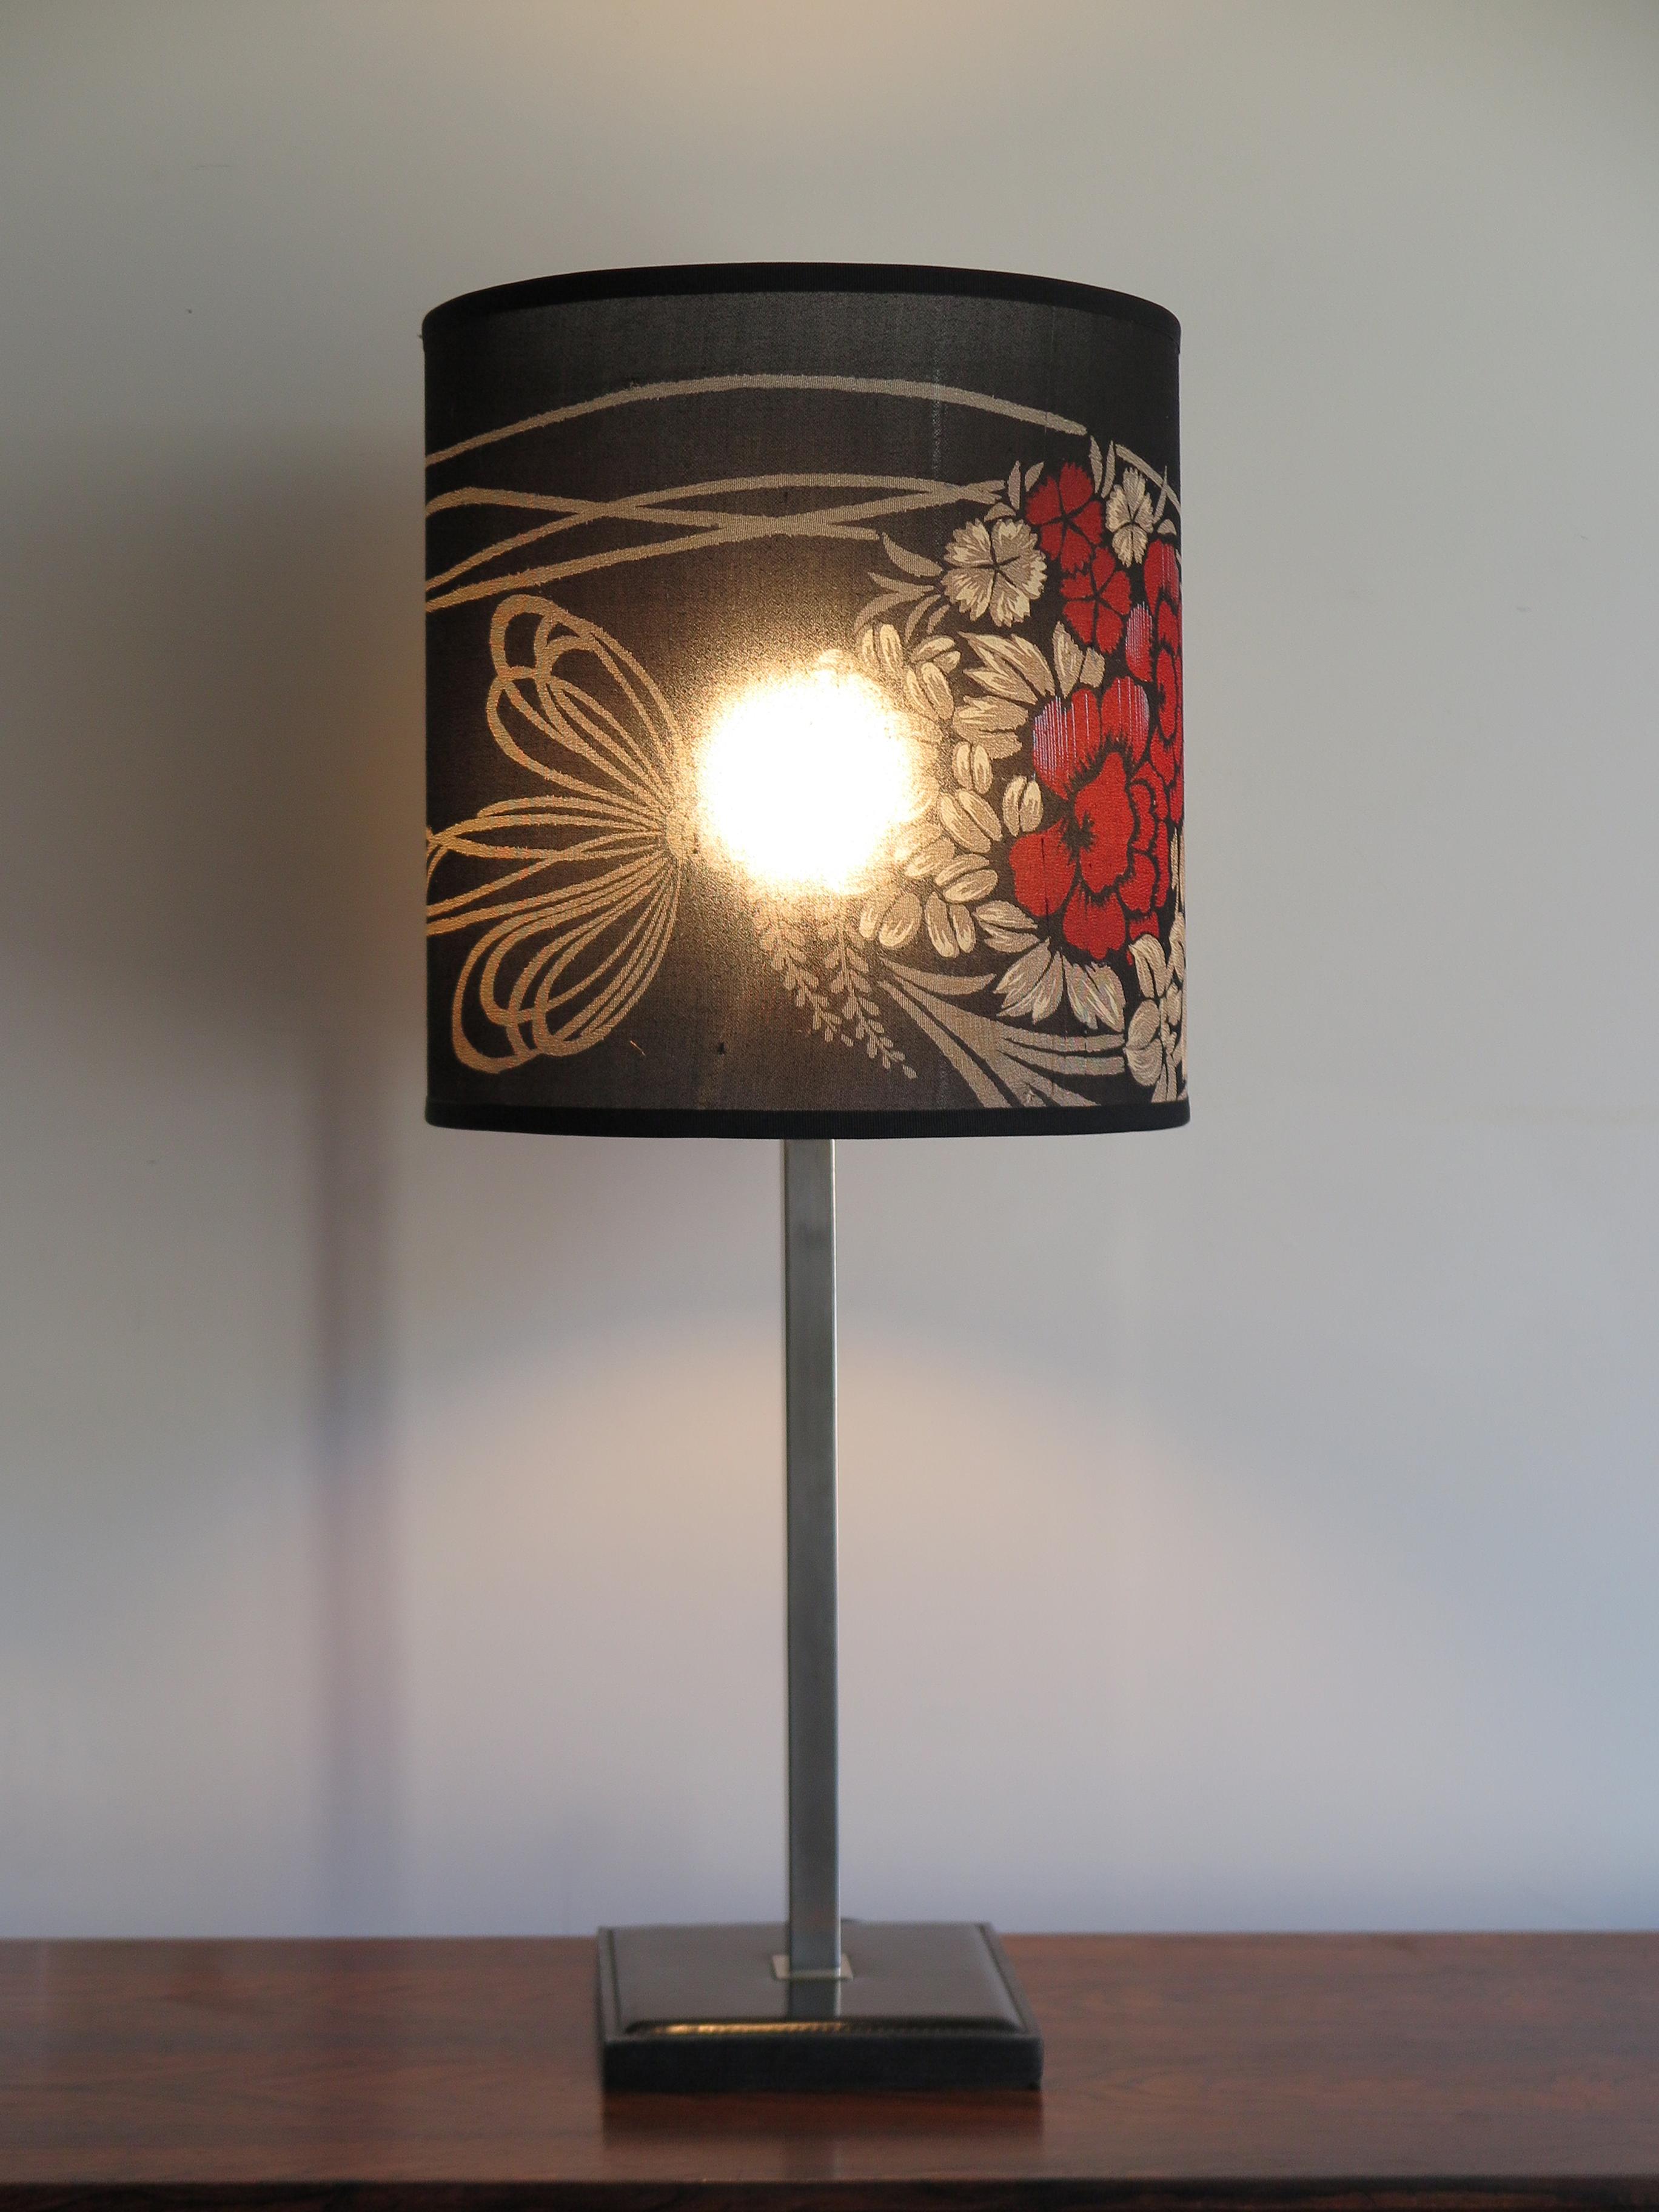 Table or desk lamp designed by Delvaux and manufactured in Belgium with leather base, chromed structure and orientable lampshade made new with antique silk Japanese kimono, 1960s.

Signature of the producer under the base.

Please note that lamp